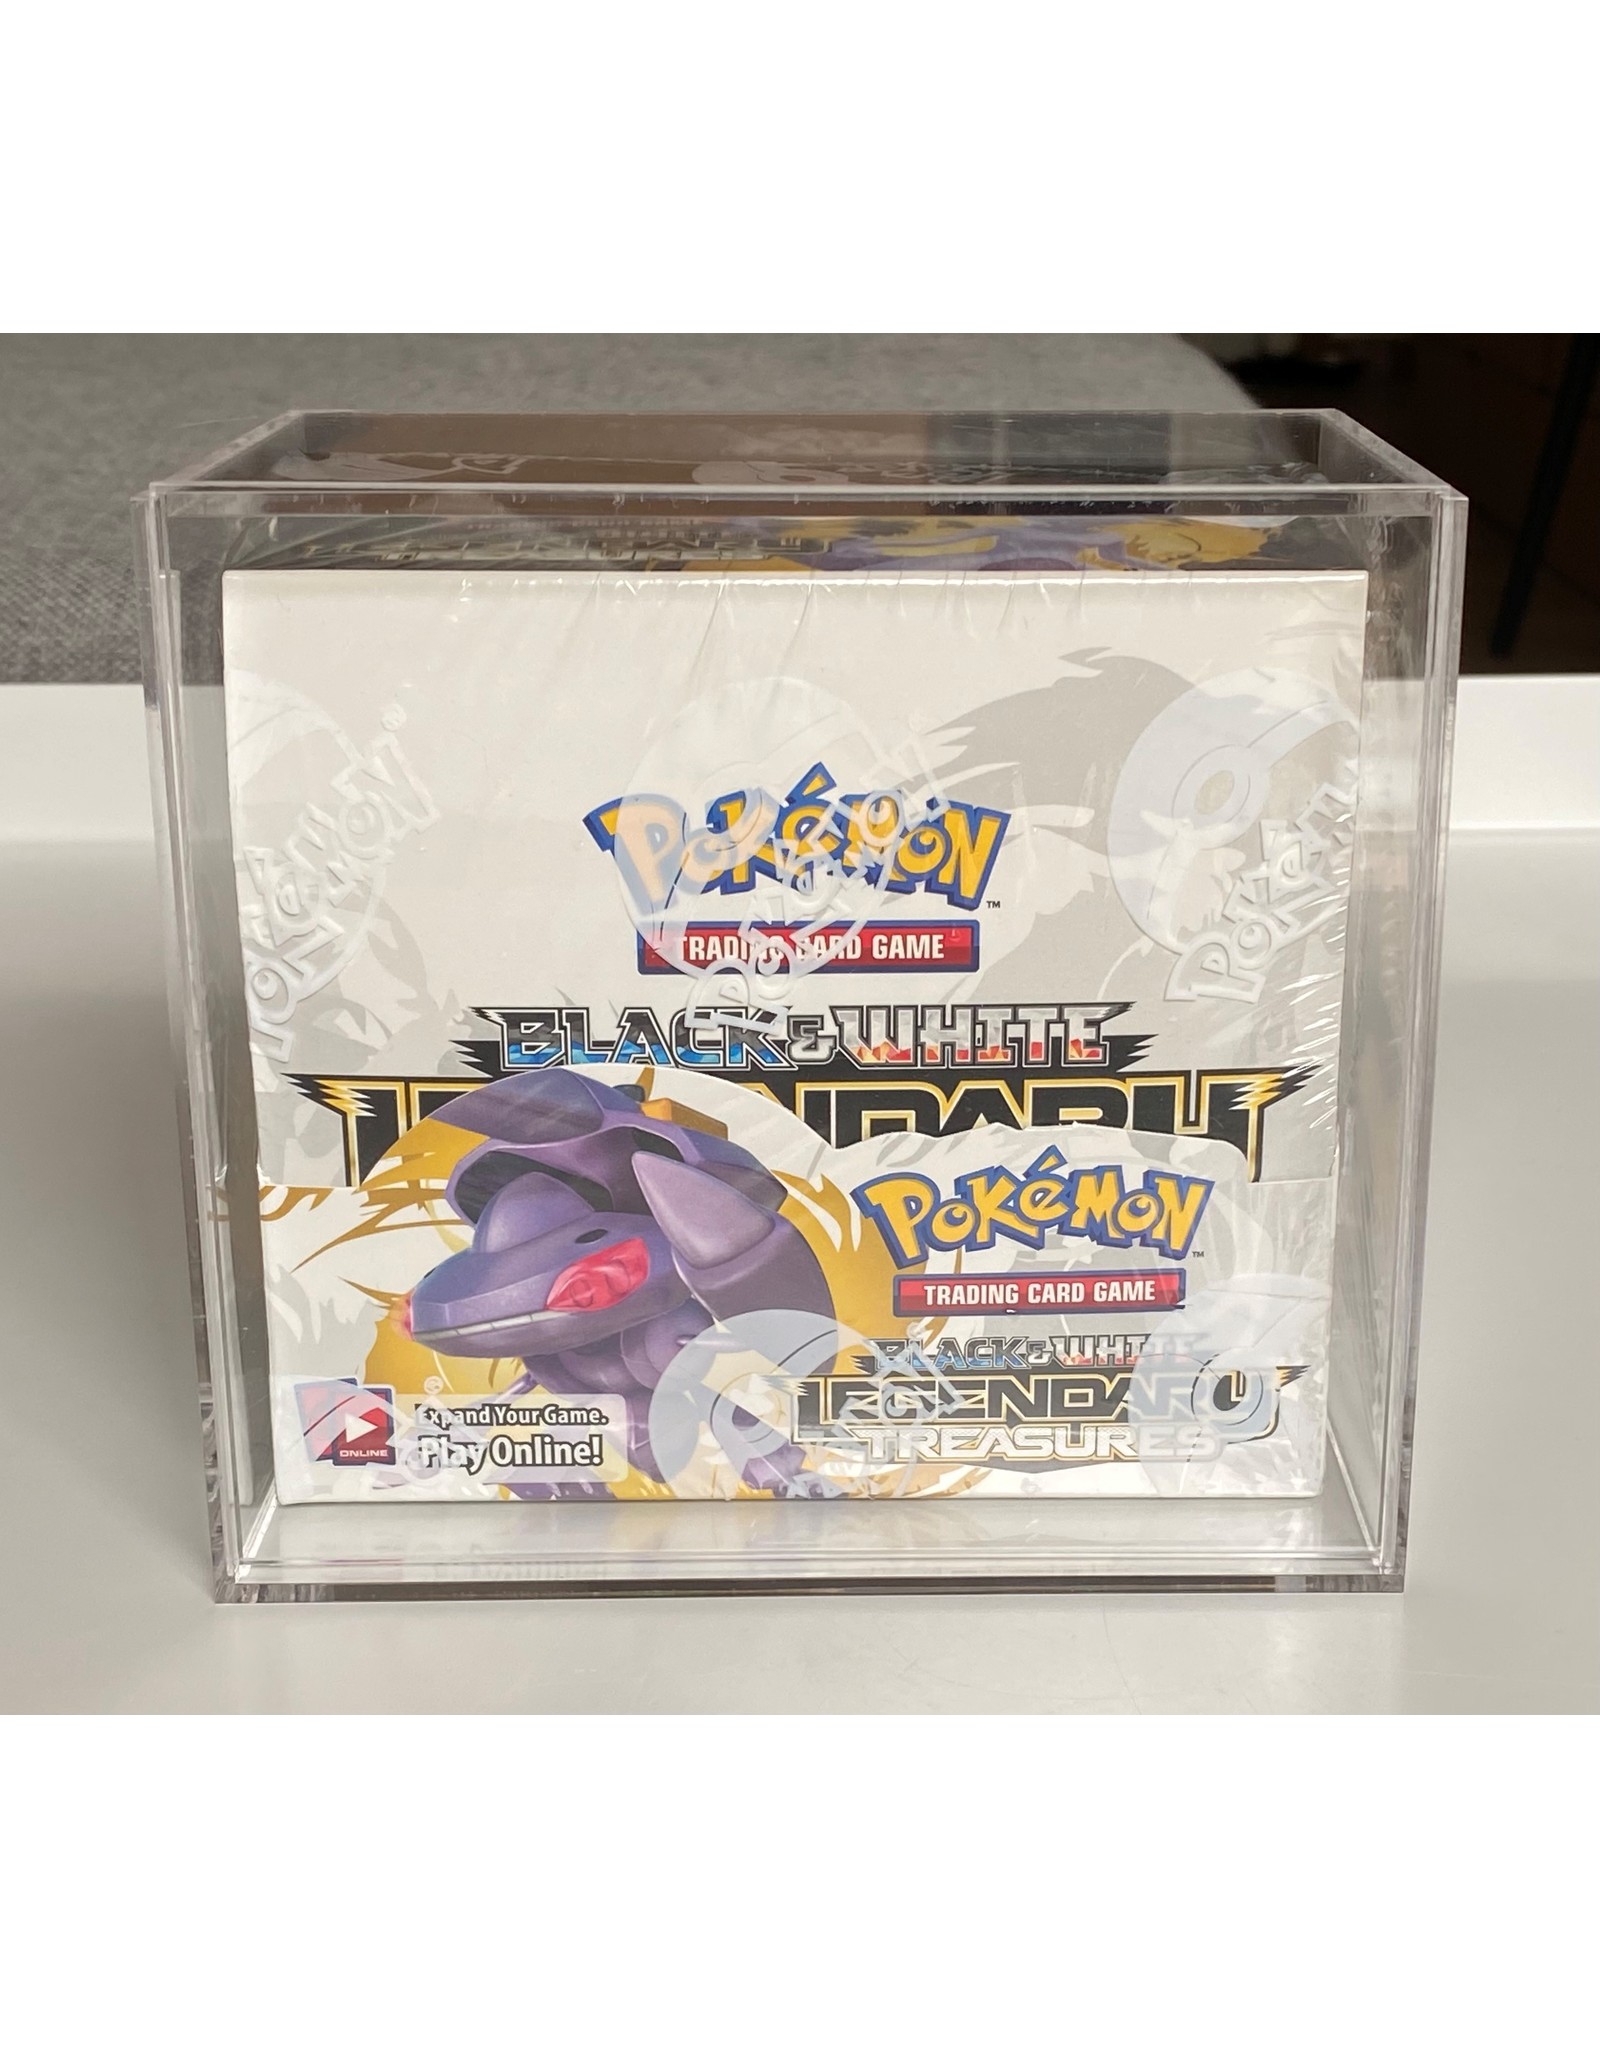 Protective Acryl Case for Pokemon Booster Box